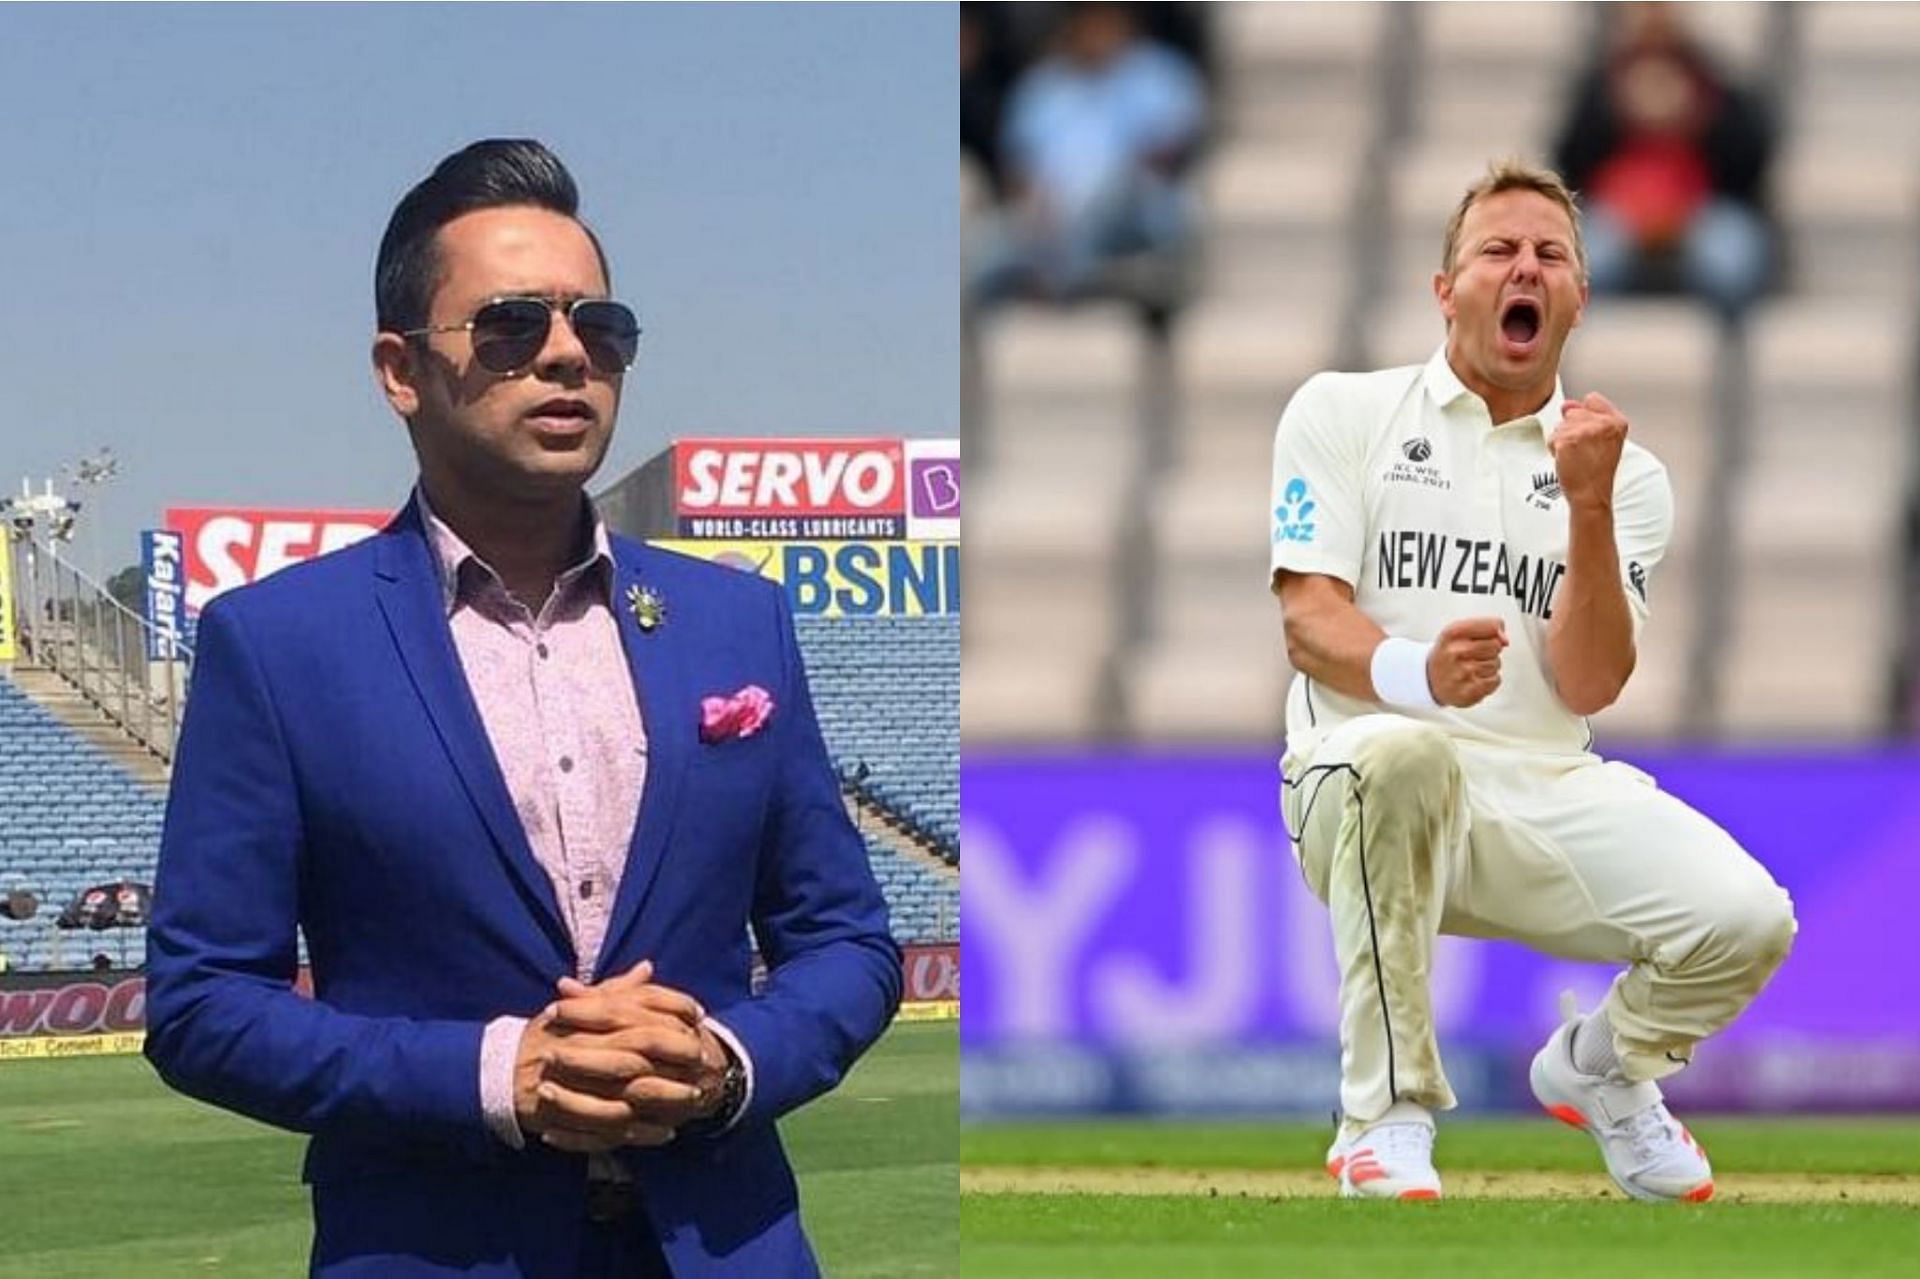 Aakash Chopra (L) censured that New Zealand made a mistake by not playing Neil Wagner (R).